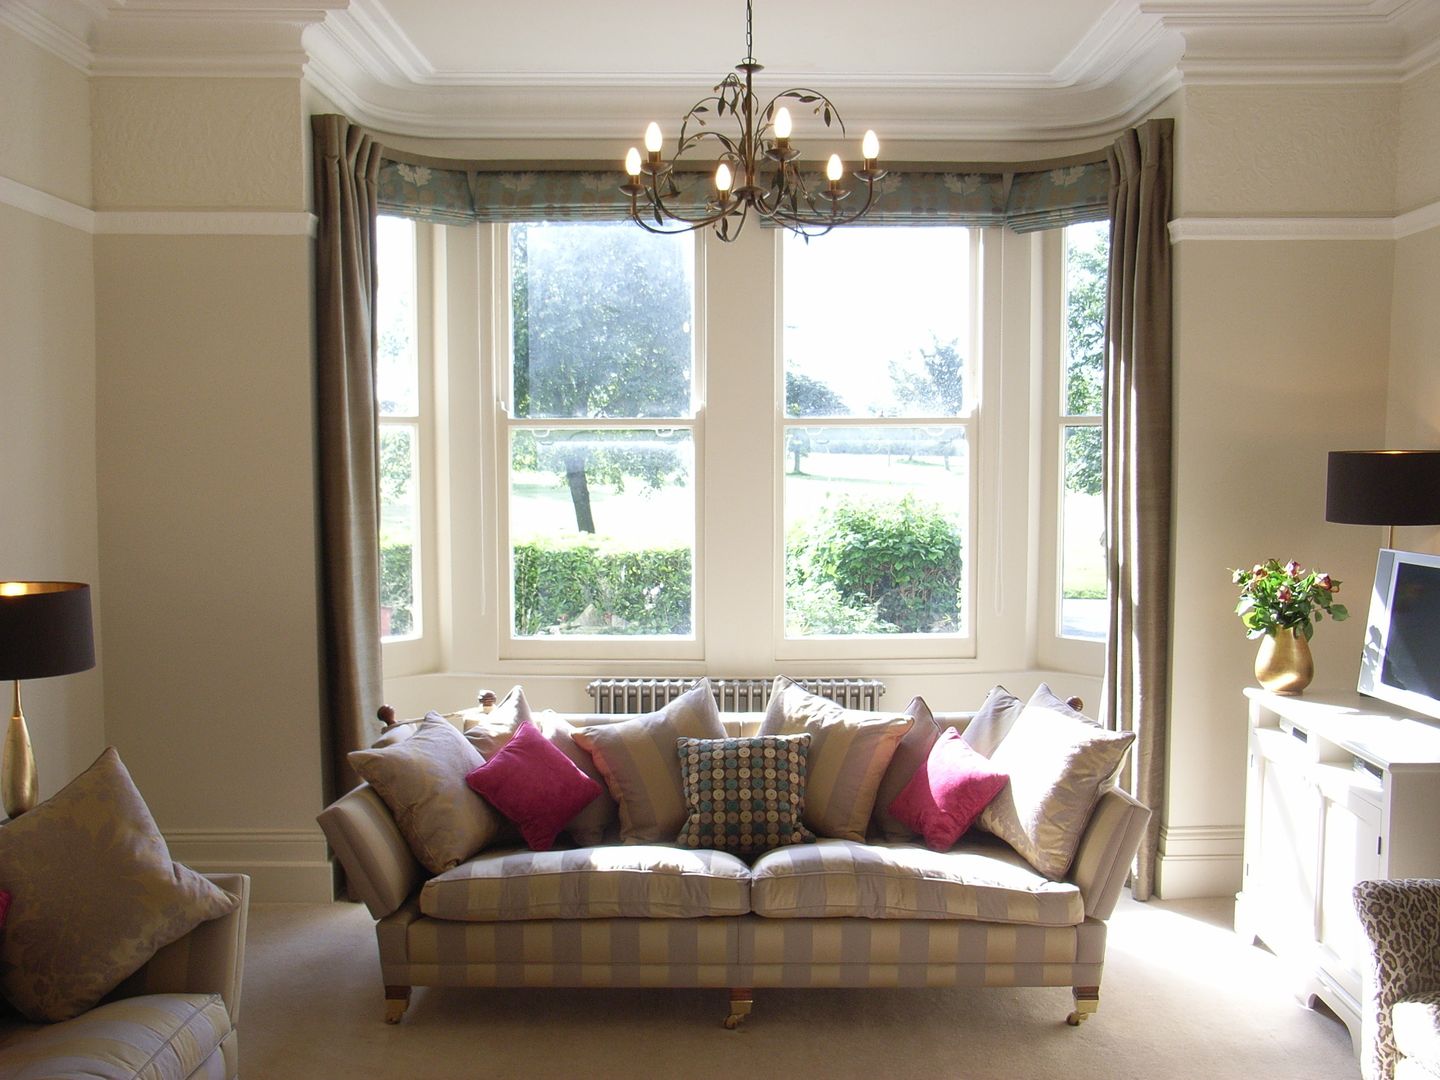 Classic View of Contemporised Victorian Living Room homify Classic style living room large bay window,roman blinds,dress curtains,victorian home,victorian property,classic sofa,large sofa,taupe colour scheme,pink accents,living room decor,living room furnish